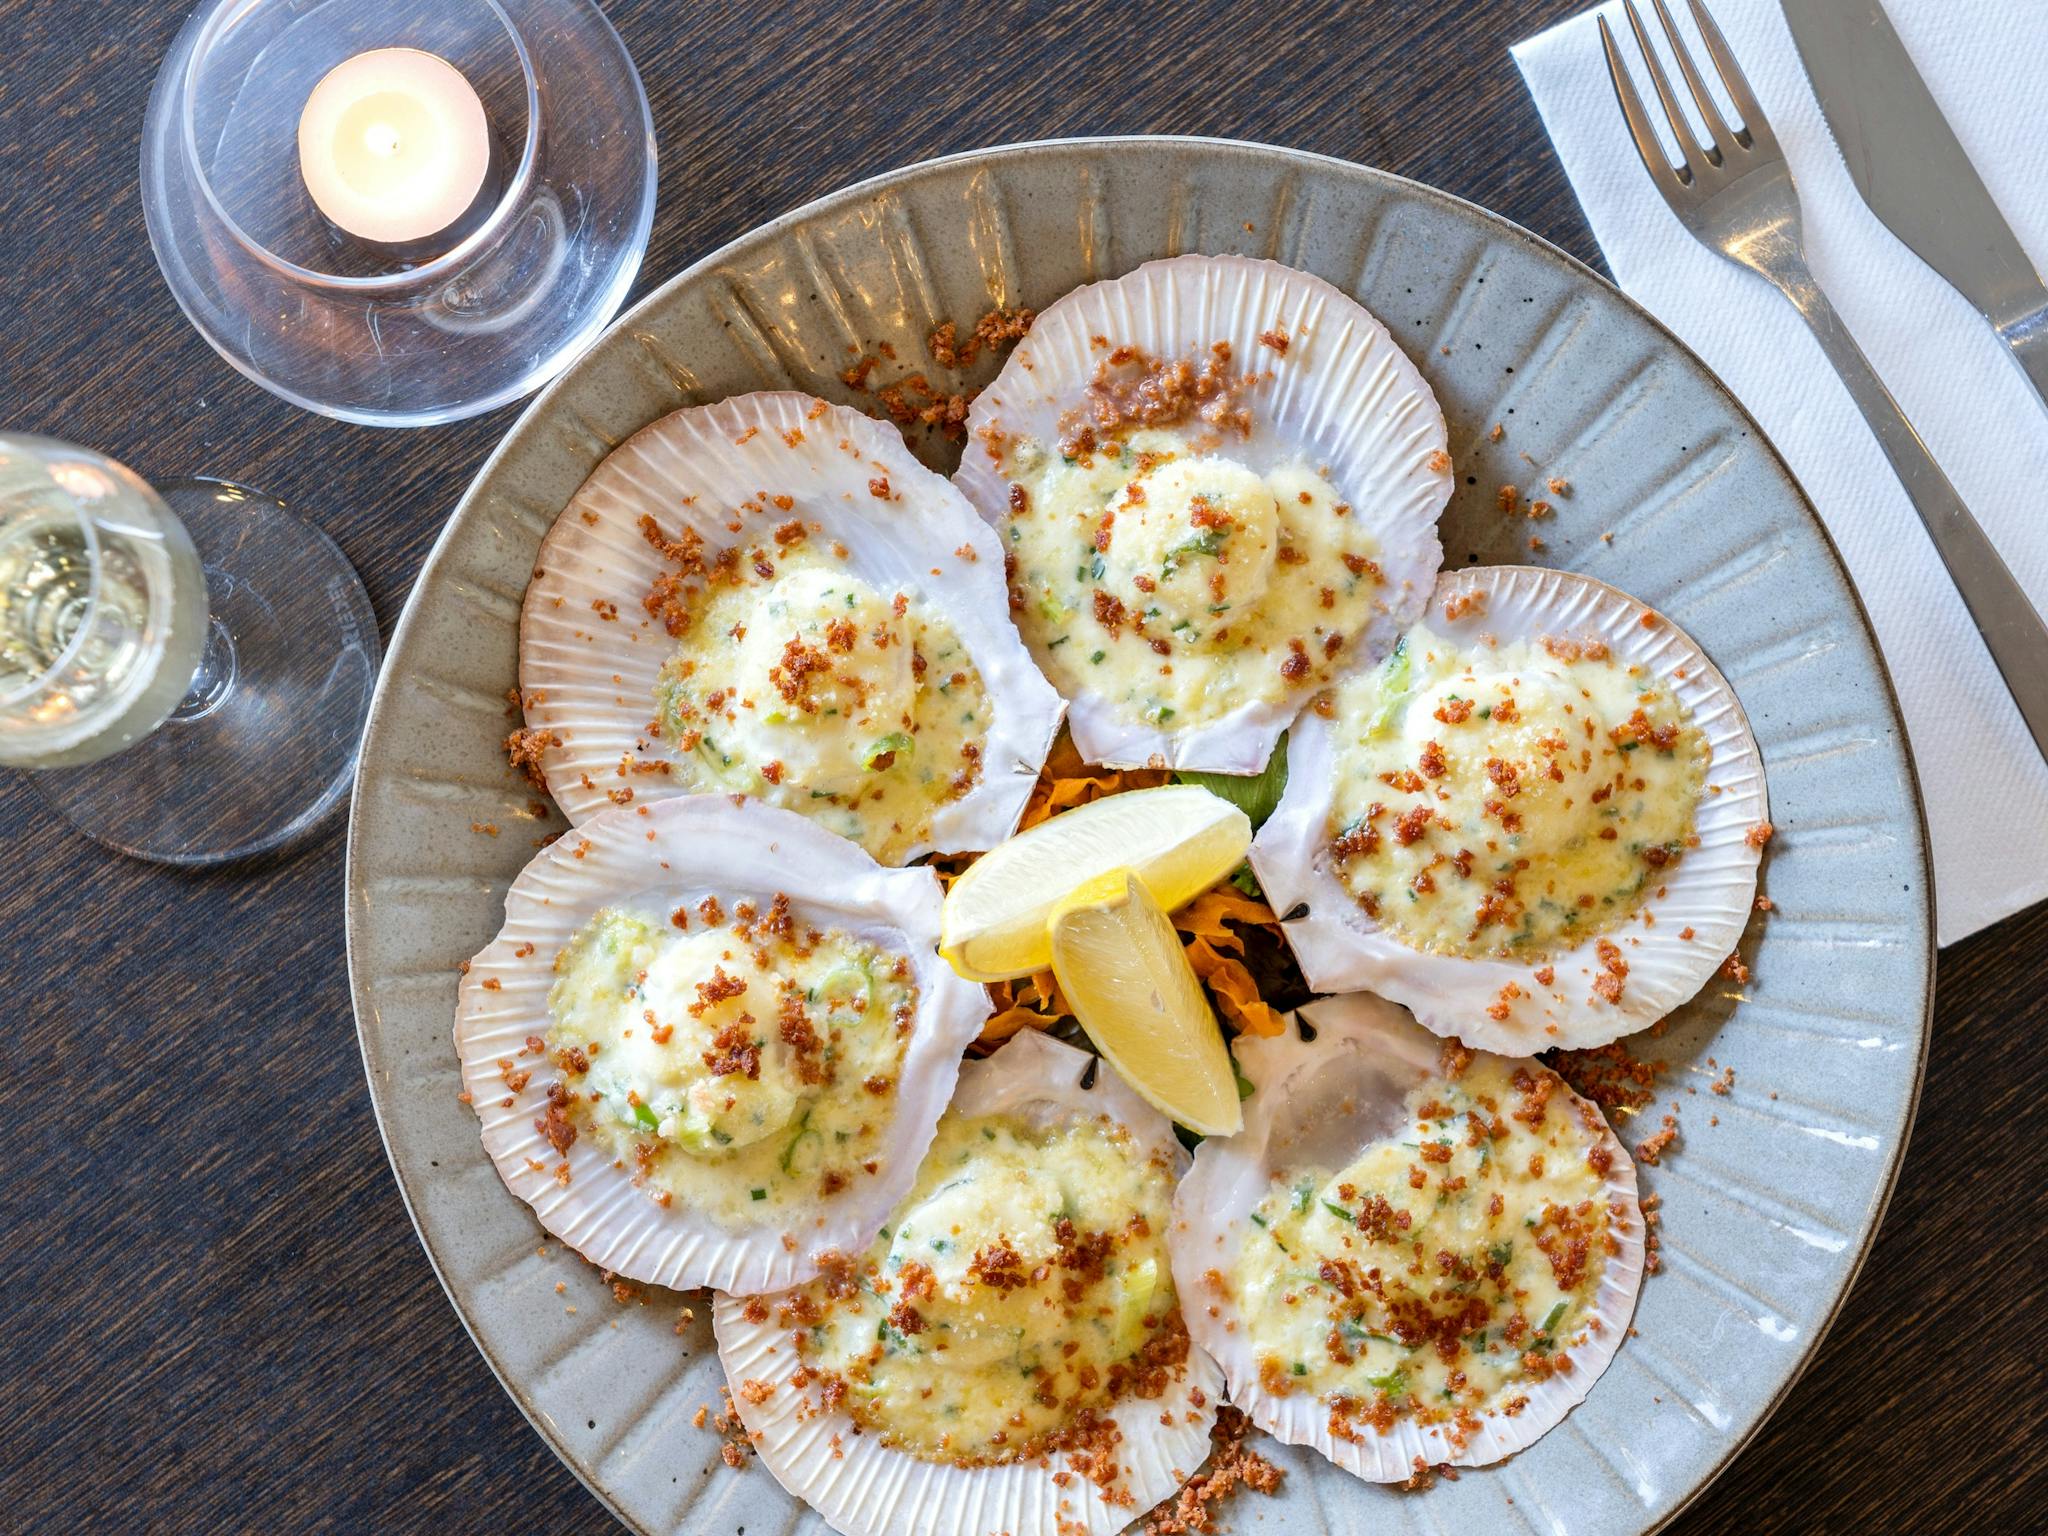 Sea scallops on ½ shell (6), lightly grilled with a garlic cream sauce and topped with chorizo crumb